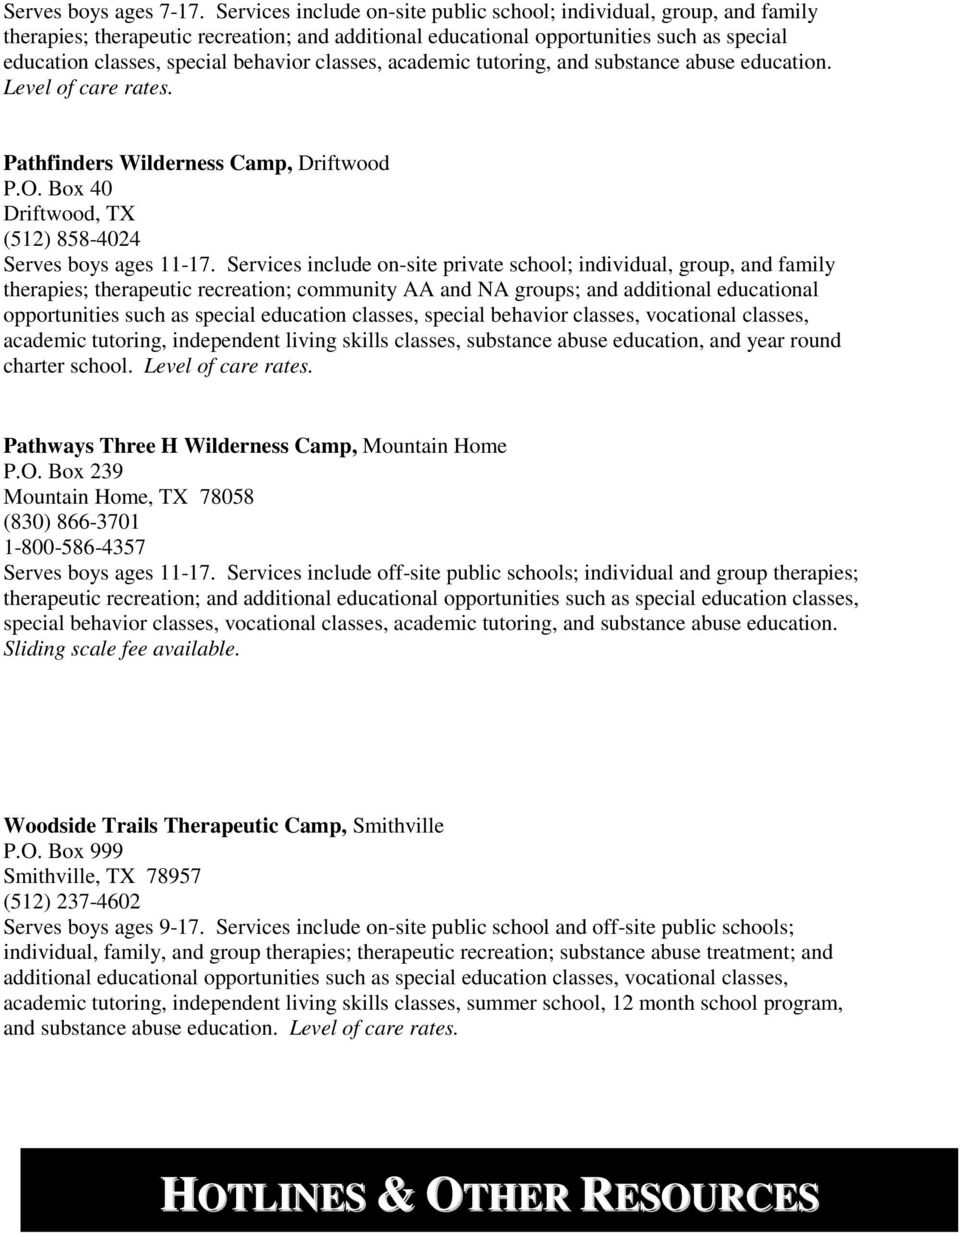 classes, academic tutoring, and substance abuse education. Level of care rates. Pathfinders Wilderness Camp, Driftwood P.O. Box 40 Driftwood, TX (512) 858-4024 Serves boys ages 11-17.